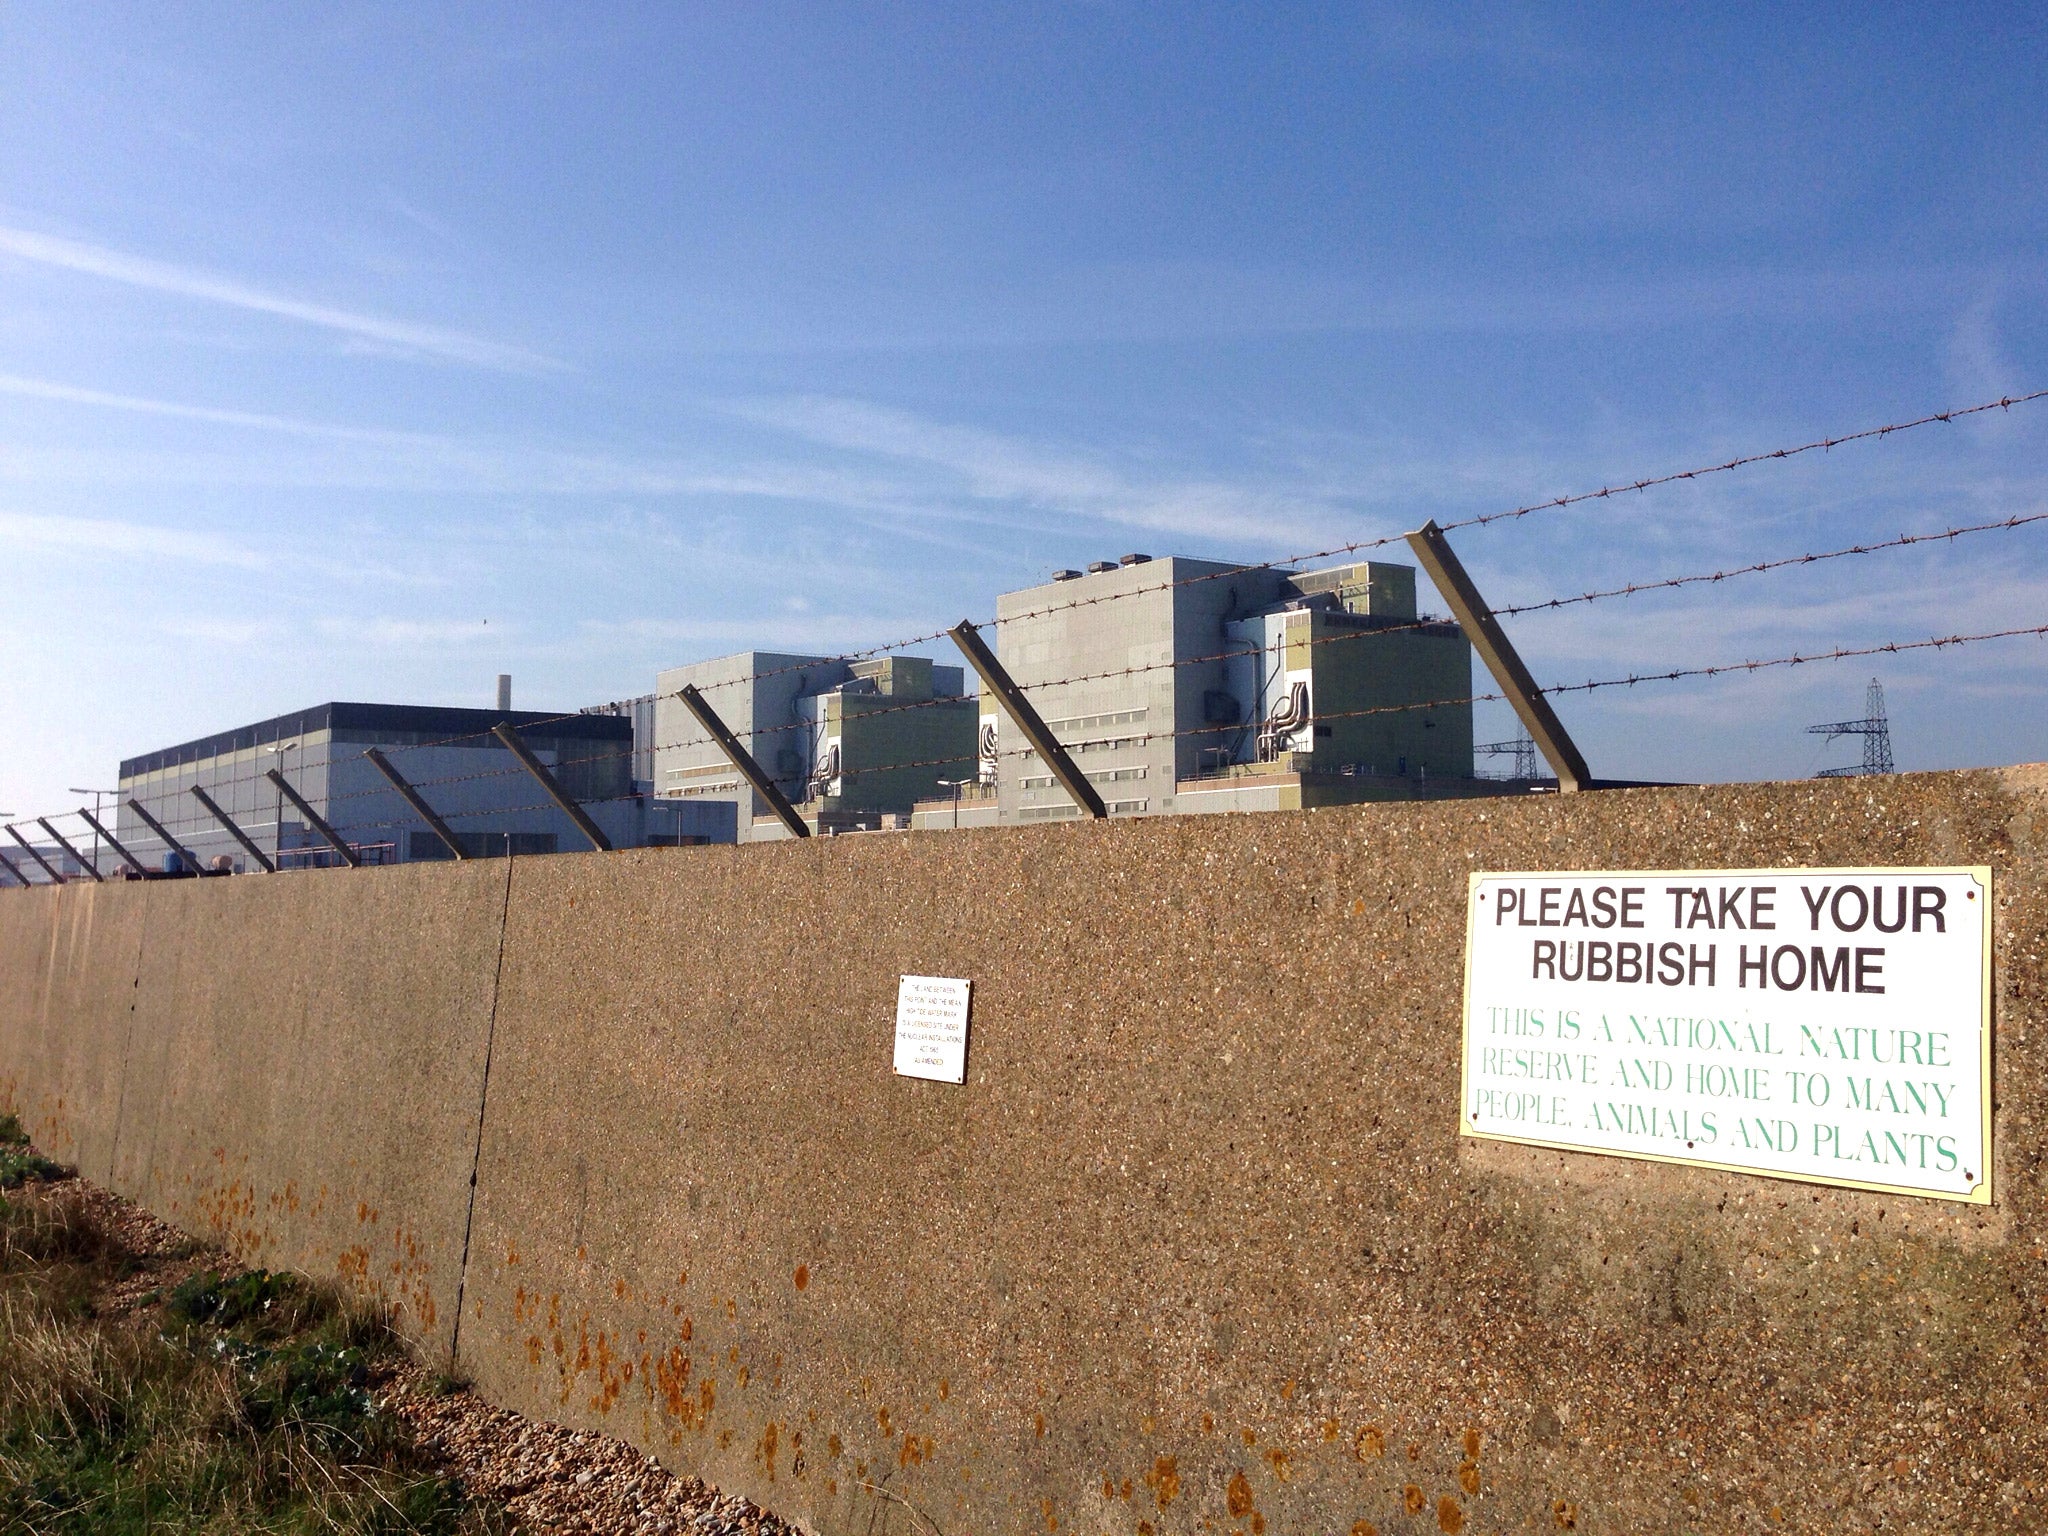 Dungeness nuclear power station